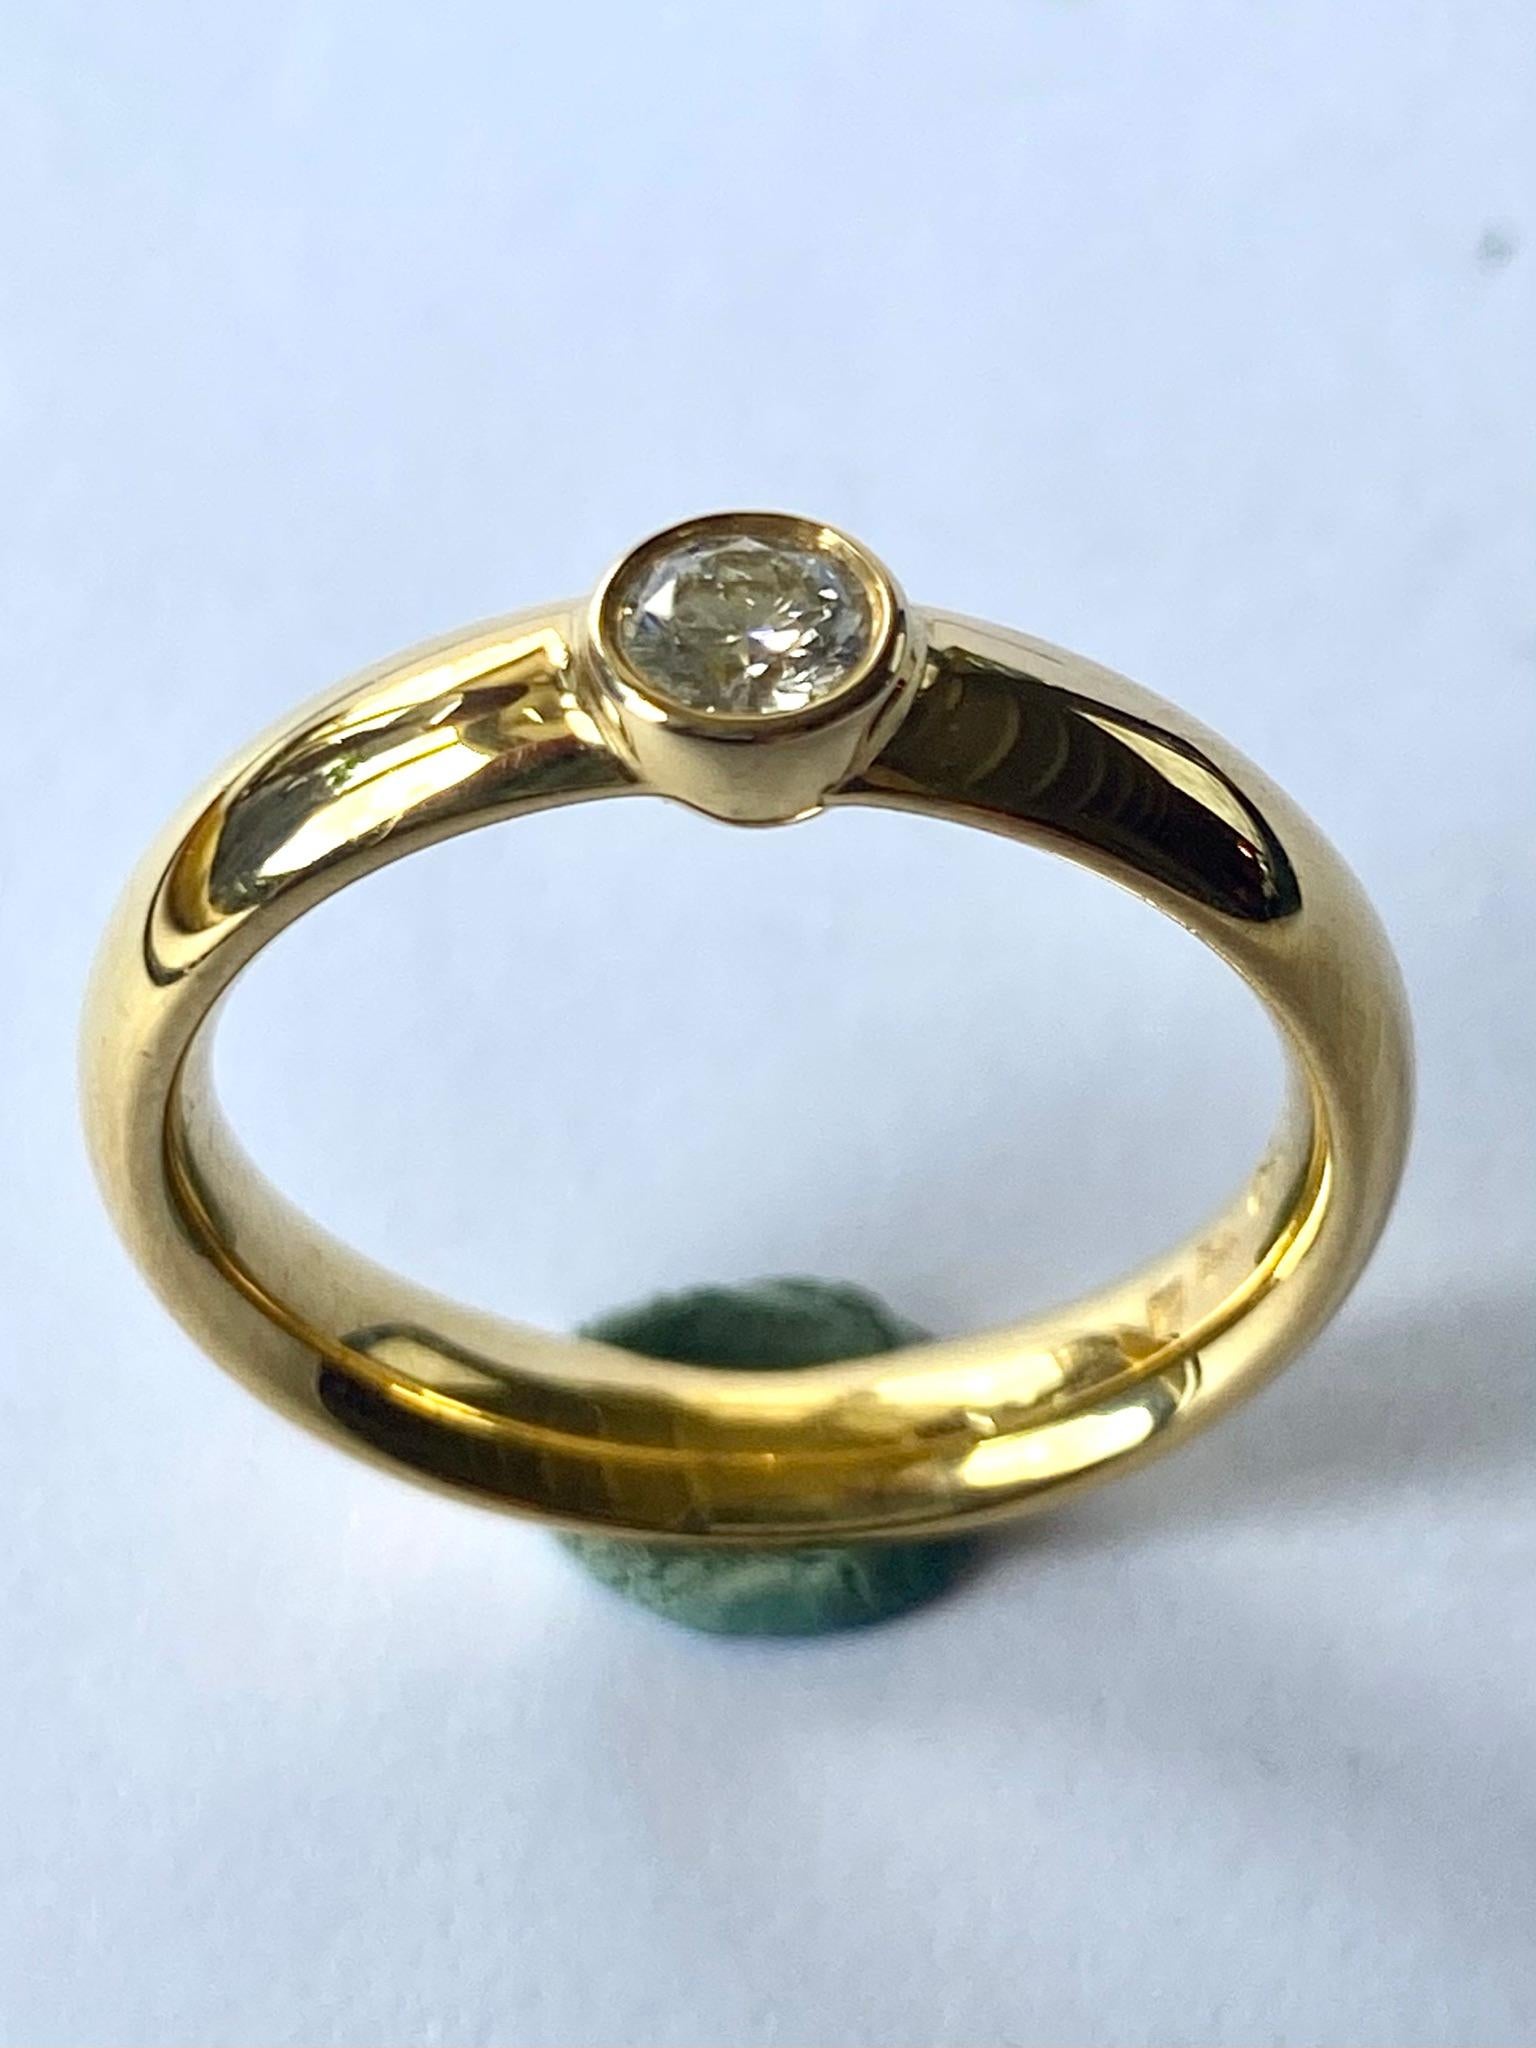 One (1) 18 Karat Yellow Gold Ring Stampoed 750 & Georg Jensen.
Model: Centenary 
Set with one (1) roudn Brillant Cut Natural Diamond  ca 0.23 ct VVS - F
Total Weight Ring   5.97 gram   3.5 mm 
Size: 17.25  (54)  USA: 7-   UK: O-
The Ring will be